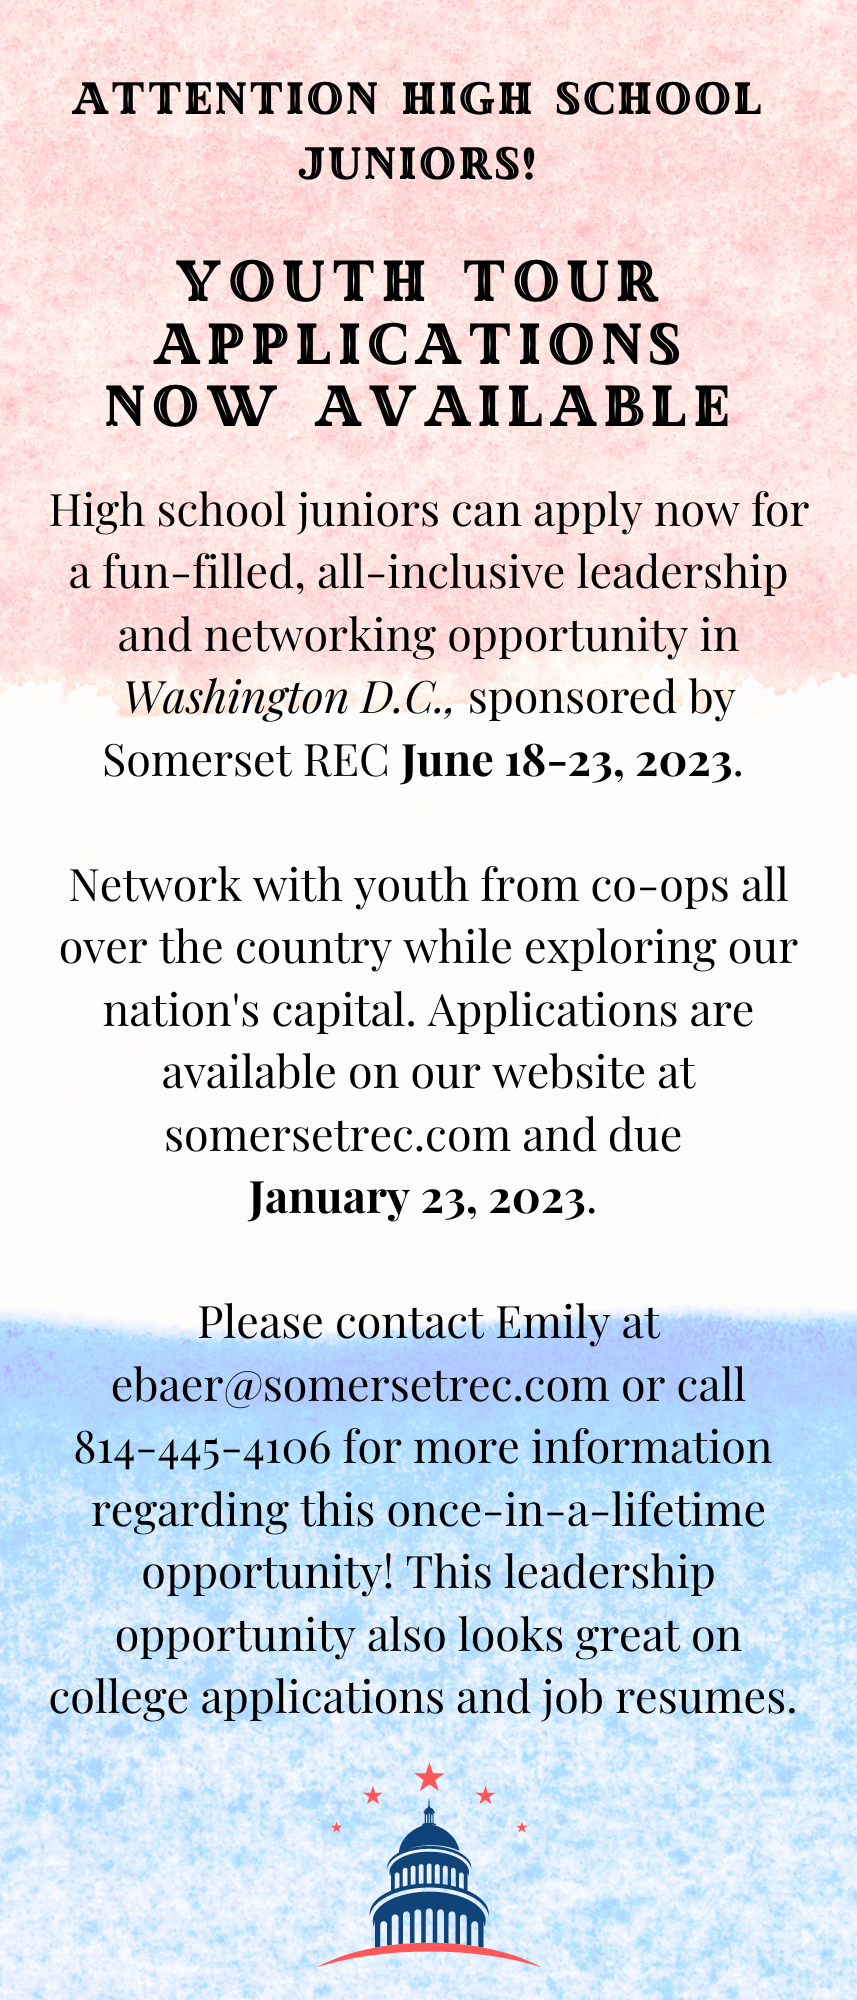 Youth Tour Applications